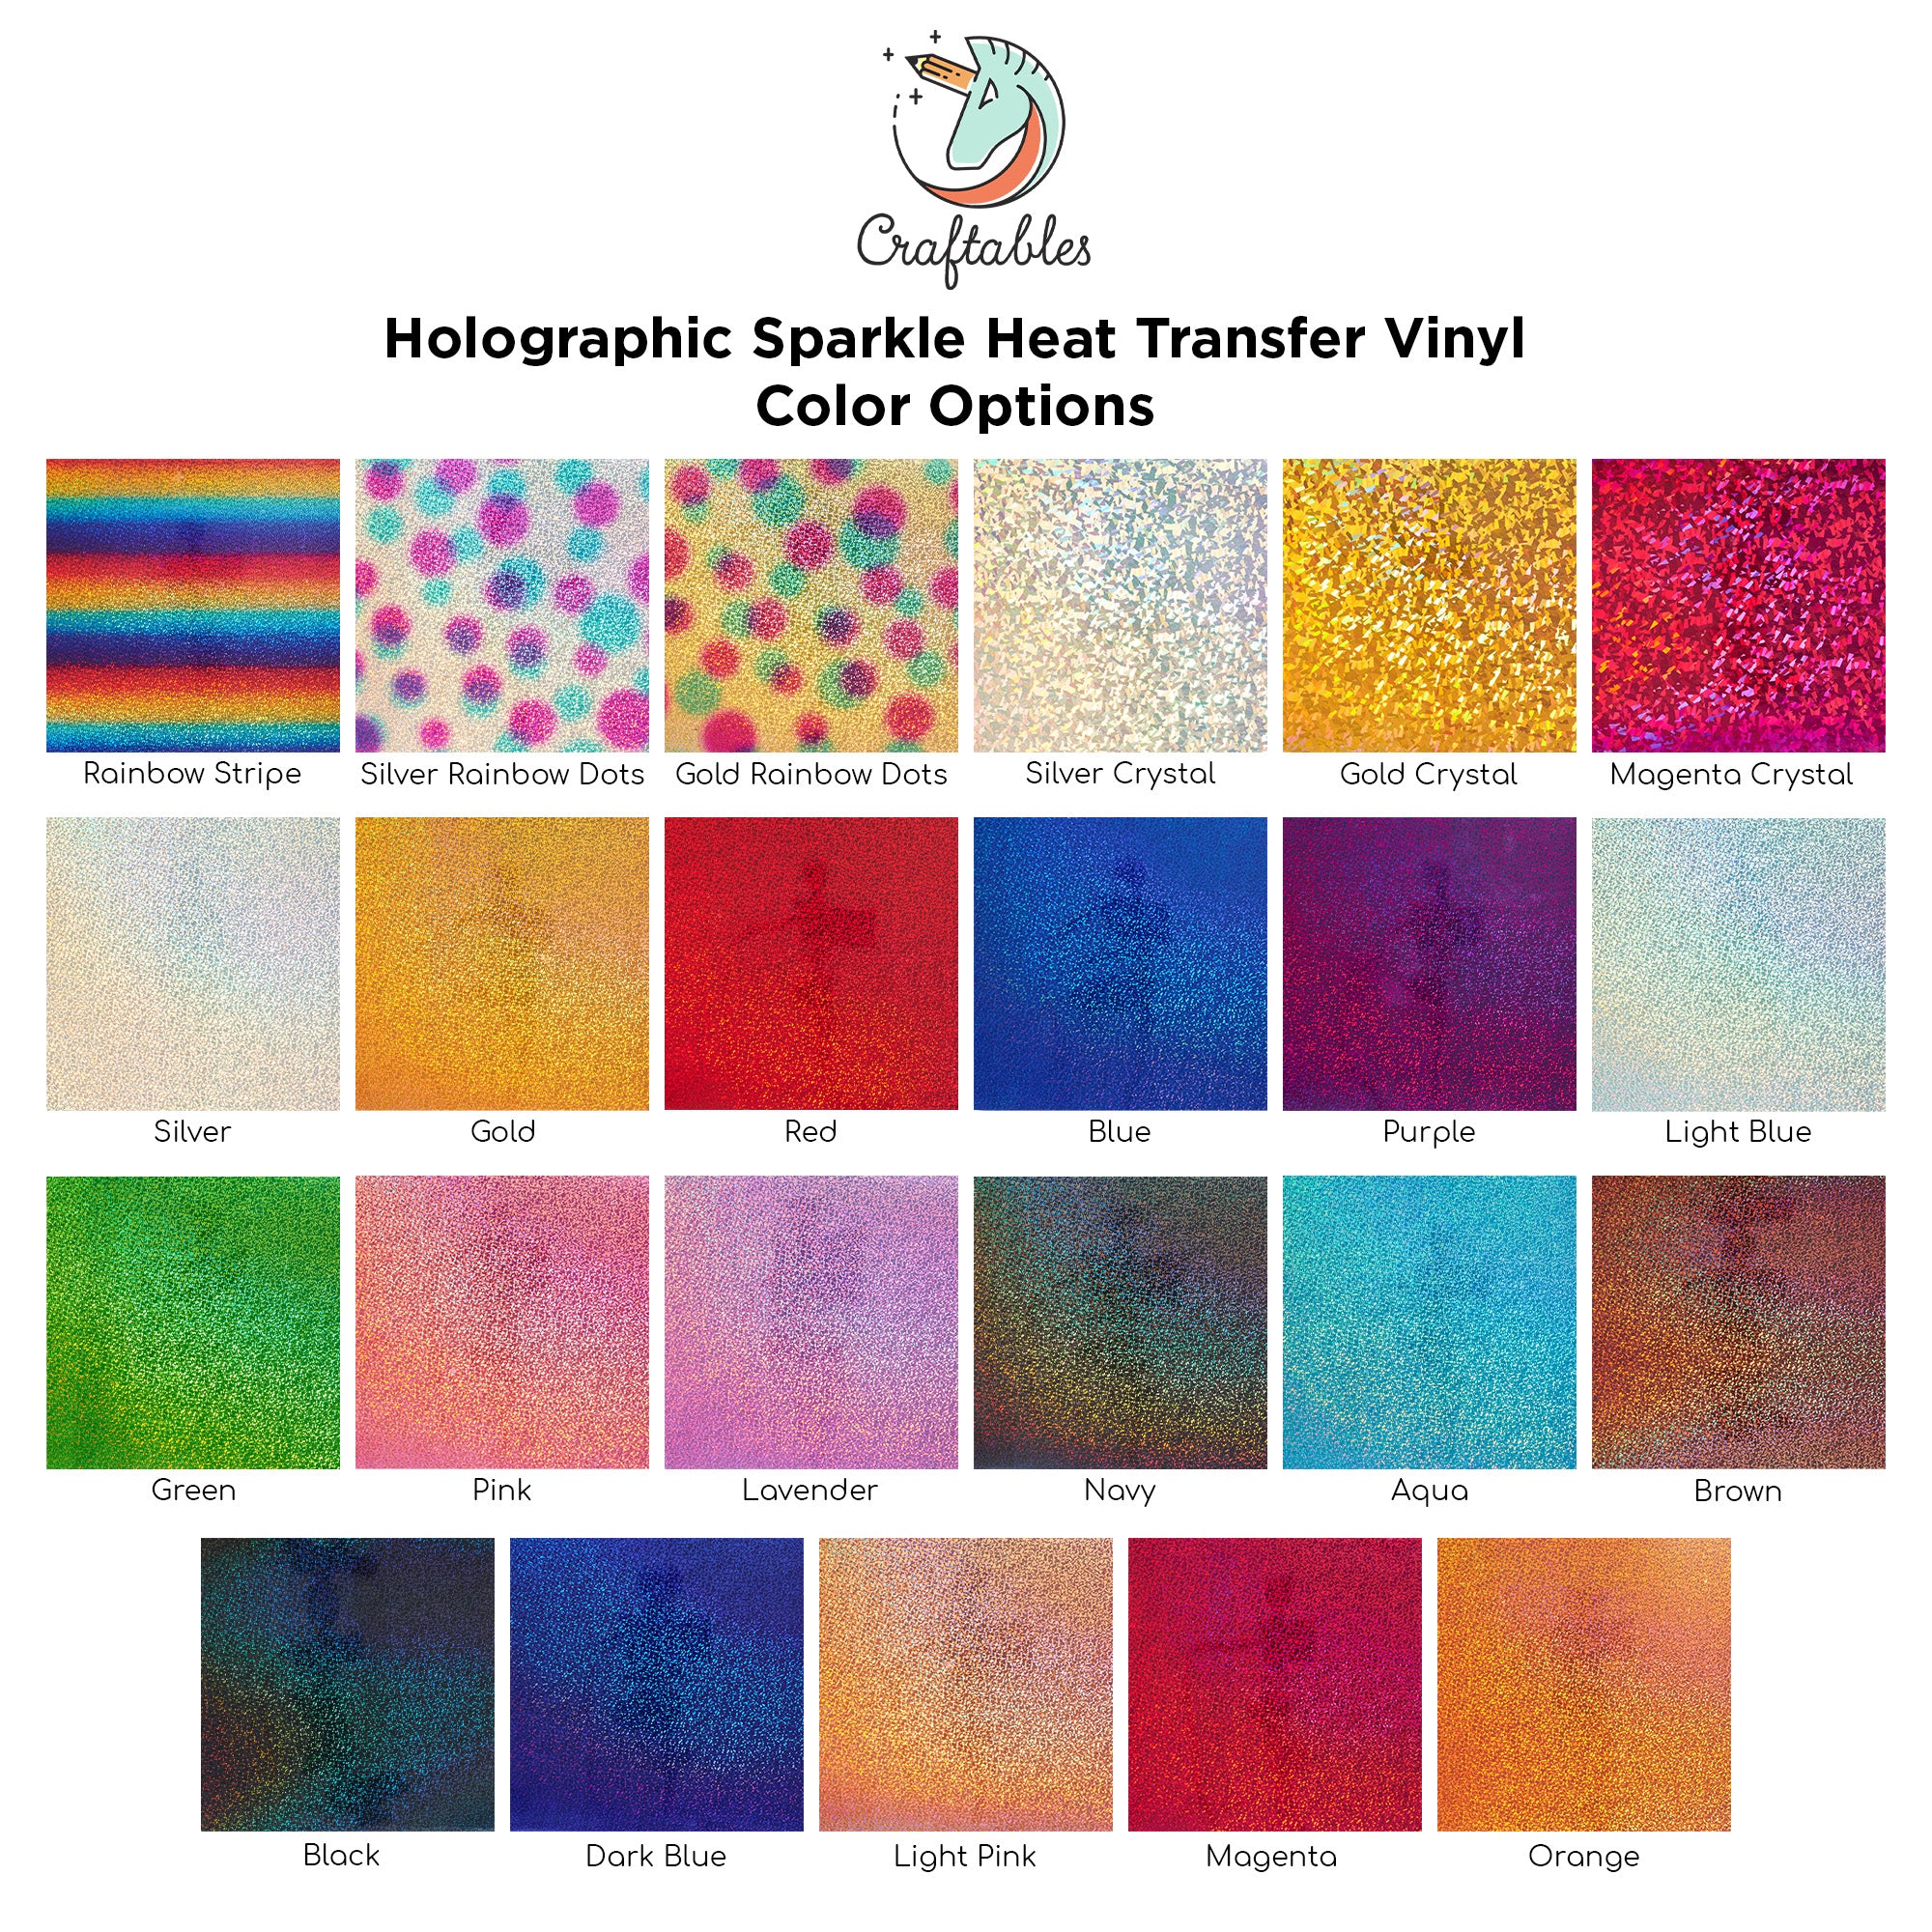 Red Holographic Sparkle Heat Transfer Vinyl Sheets By Craftables